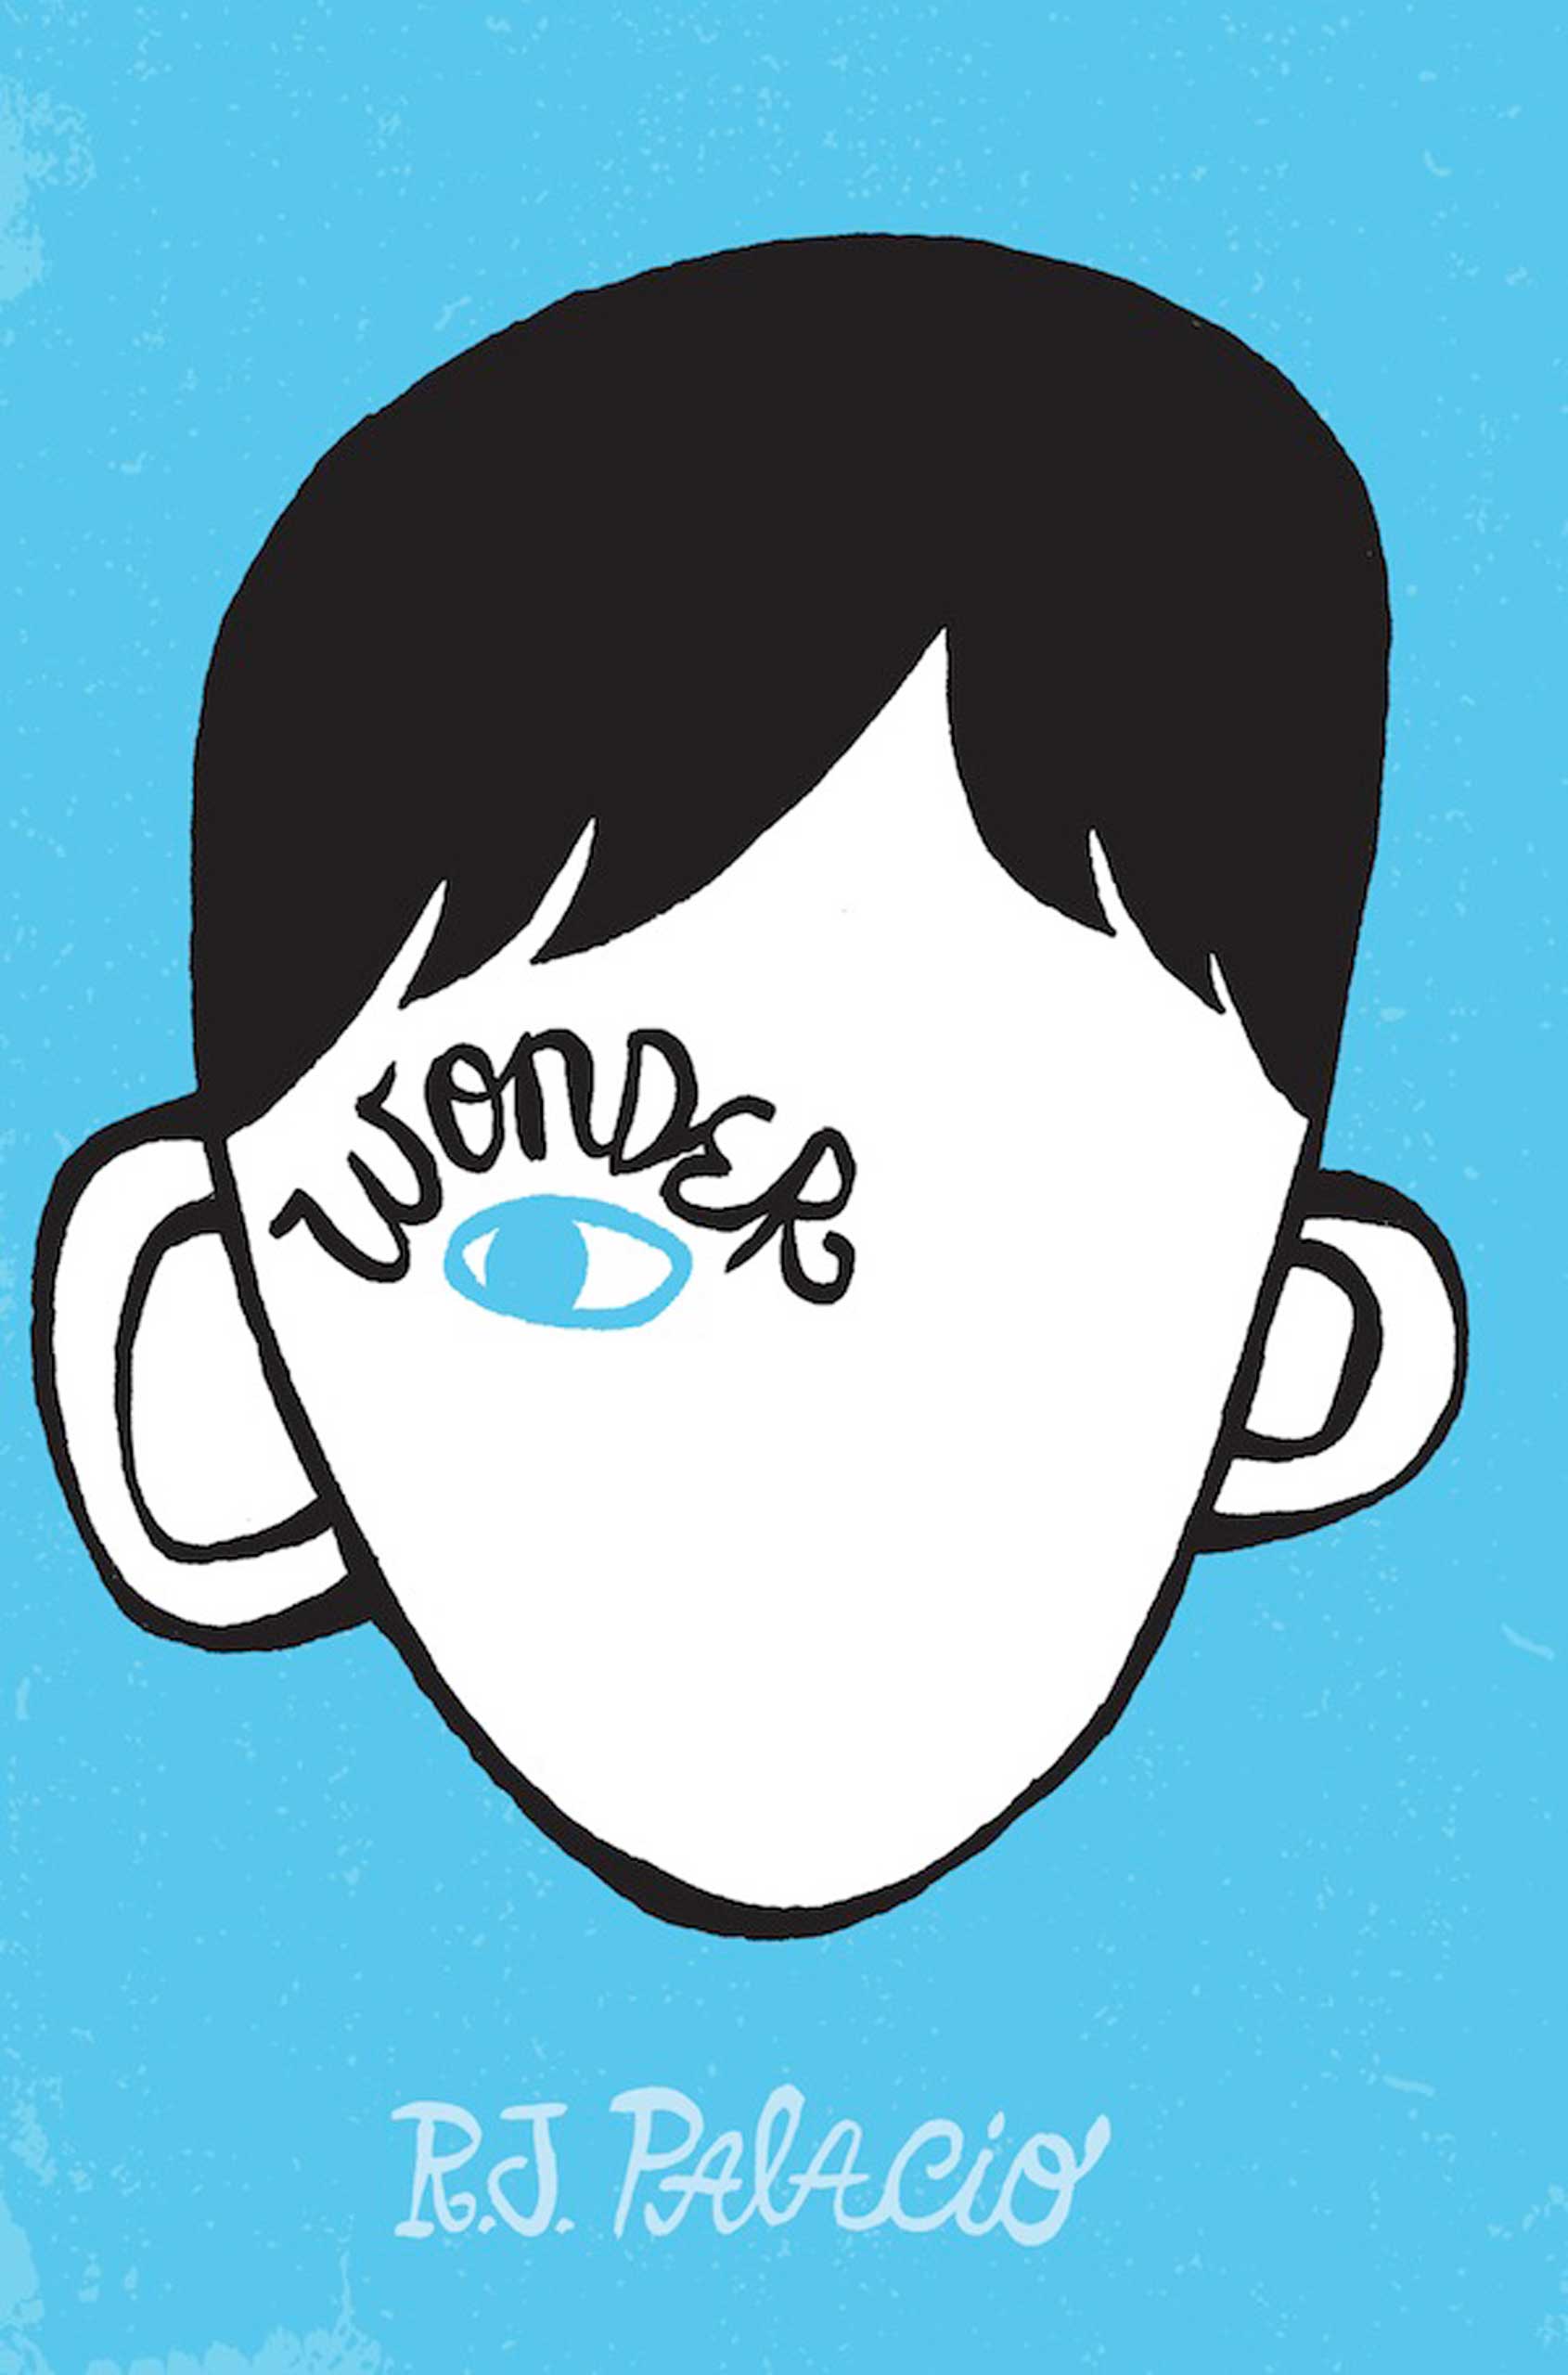 Wonder, by R.J. Palacio. 
                              
                              
                              
                              August Pullman, who has a rare cranial deformity, decides to stop being homeschooled and attend Beecher Prep for middle school, but he is forced to overcome bullying and name-calling from some of his peers.
                              
                              
                              Buy now: Wonder